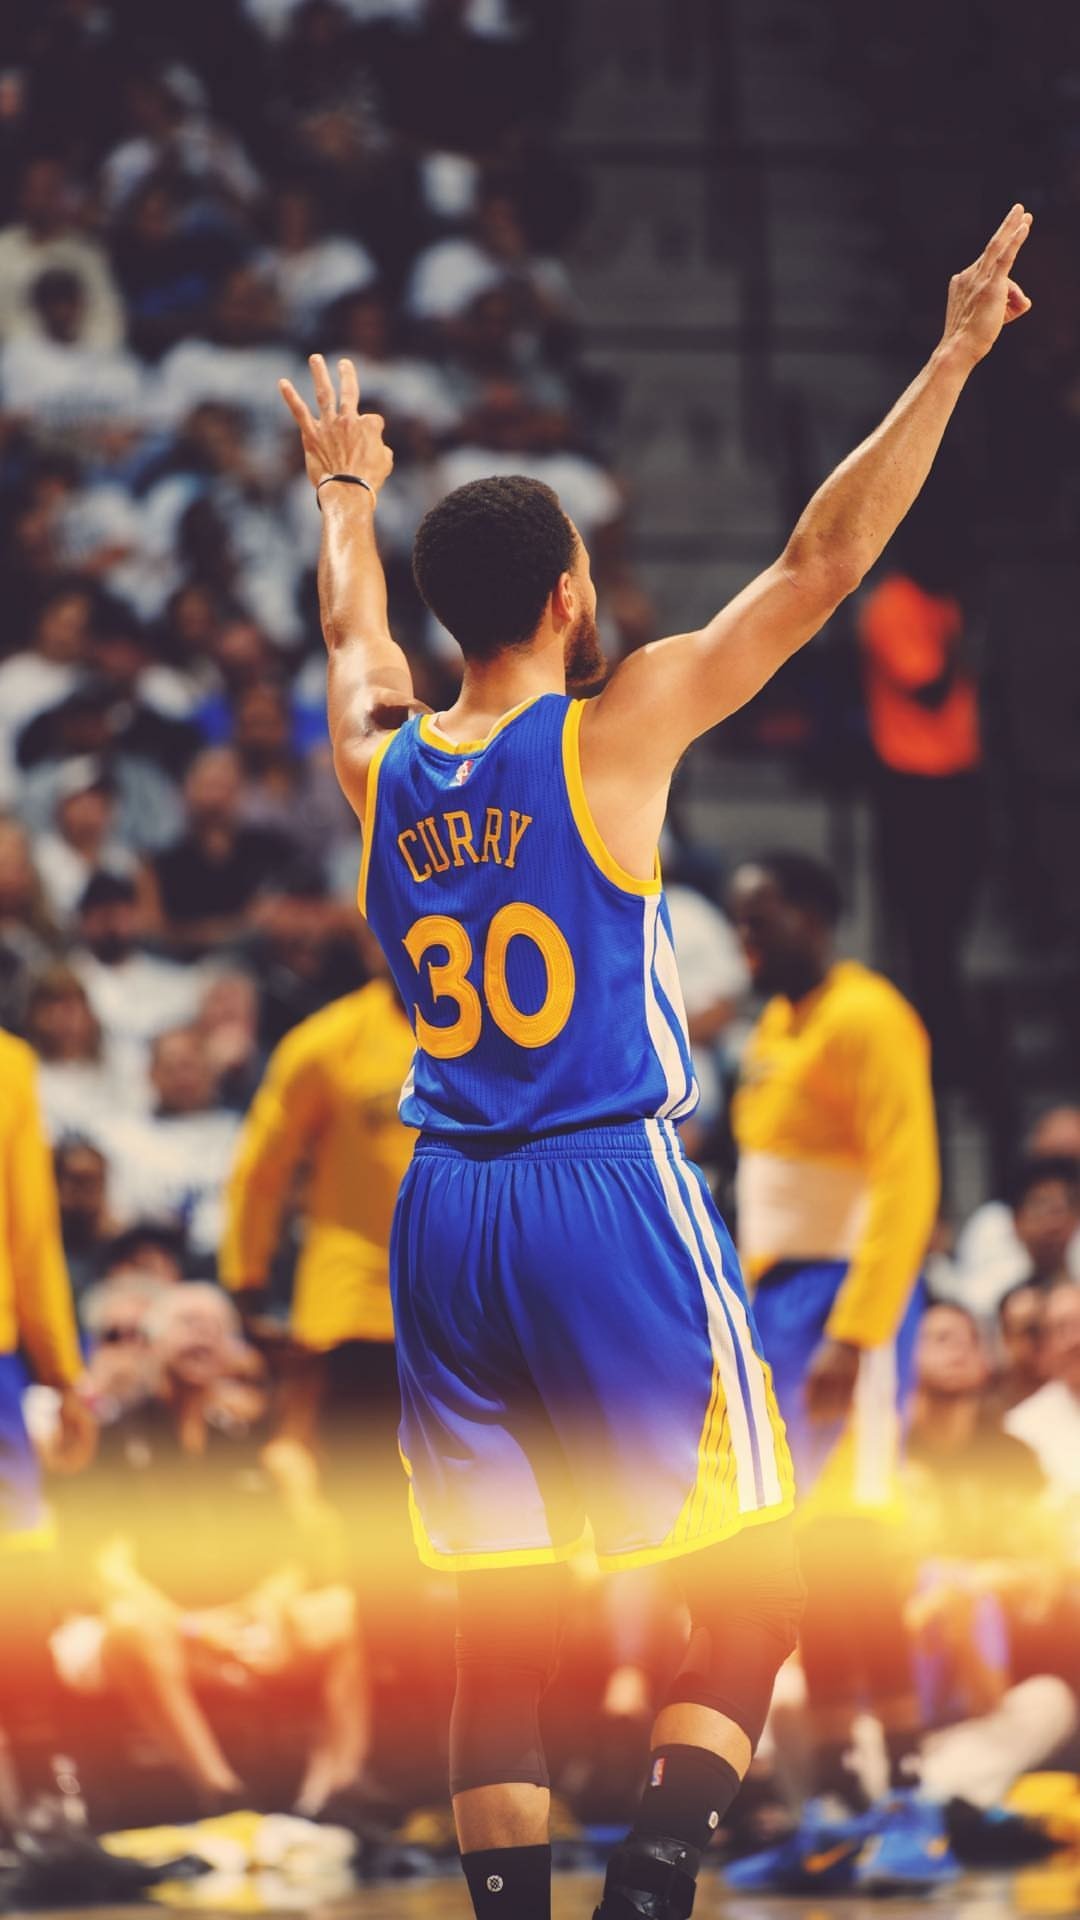 Wallpaper Iphone Background Iphone Wallpaper Stephen Curry